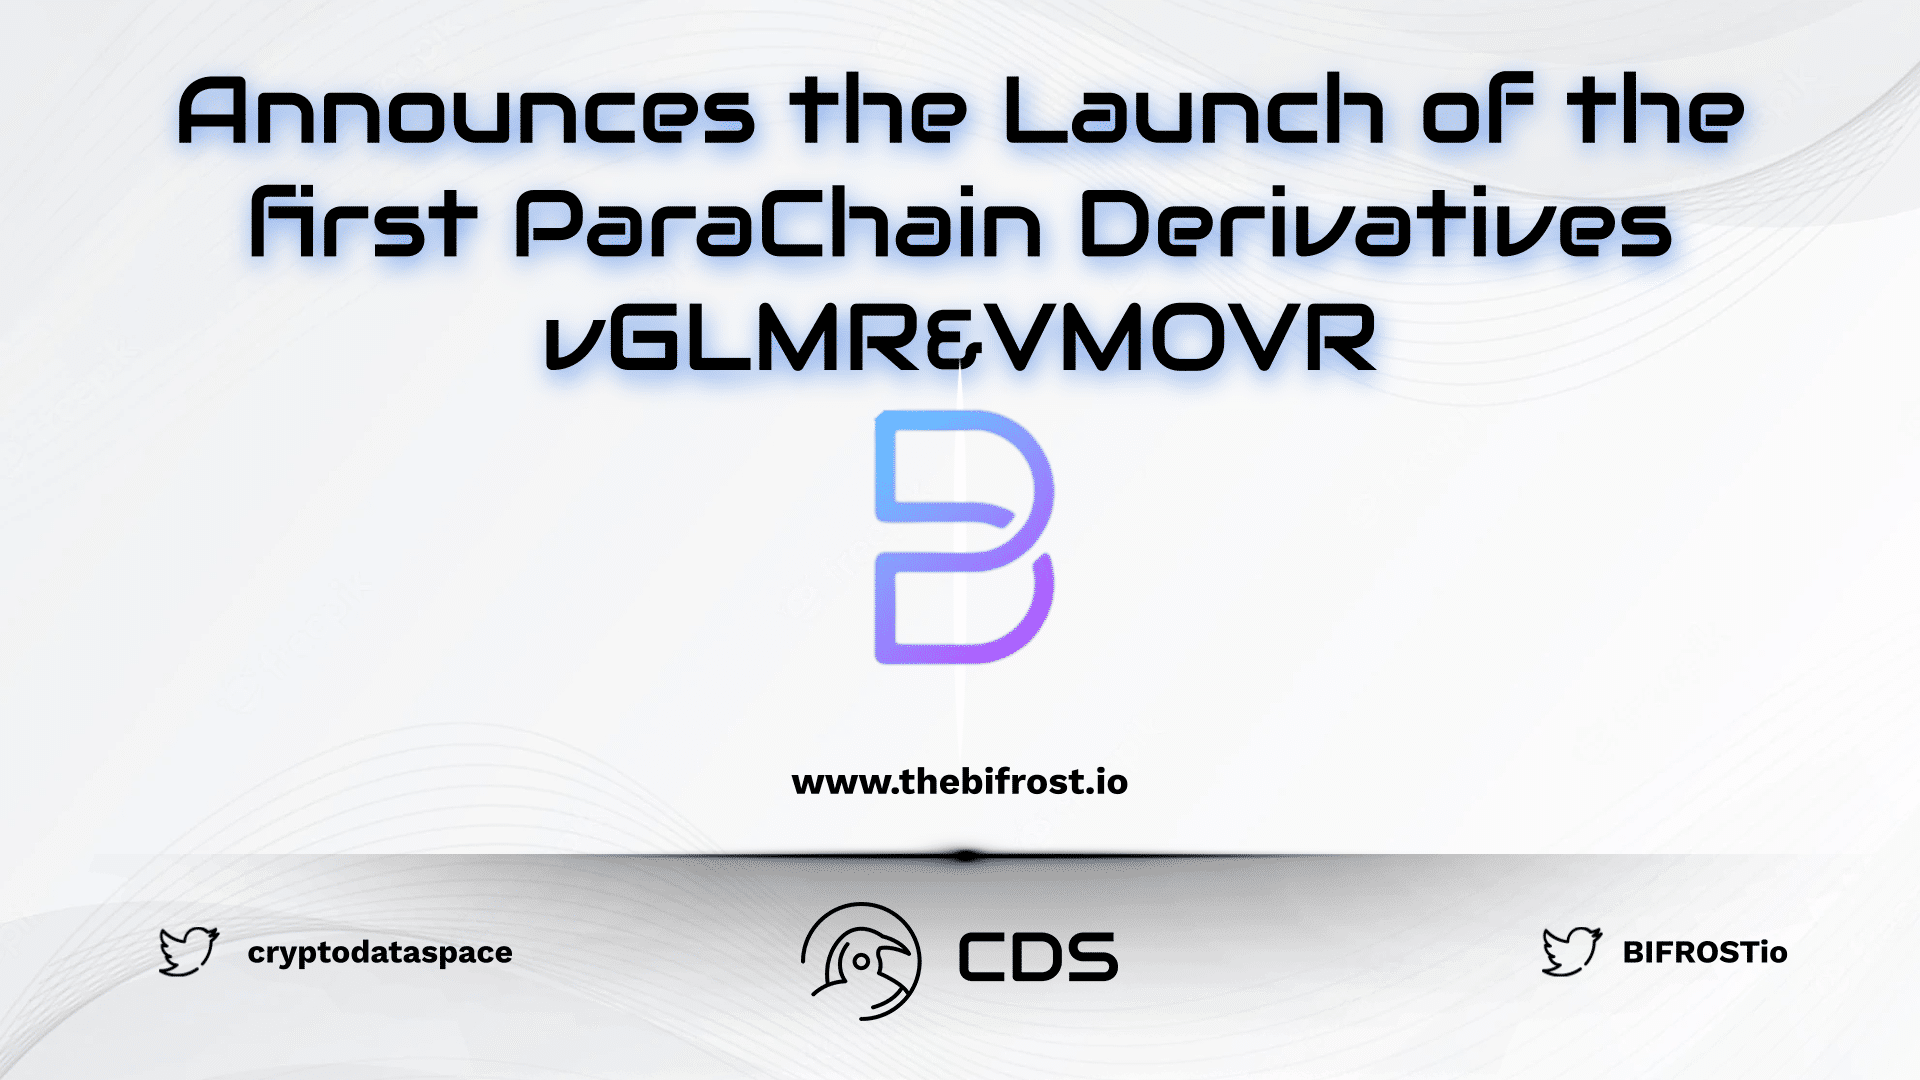 Bifrost Announces the Launch of the first ParaChain Derivatives vGLMR&vMOVR